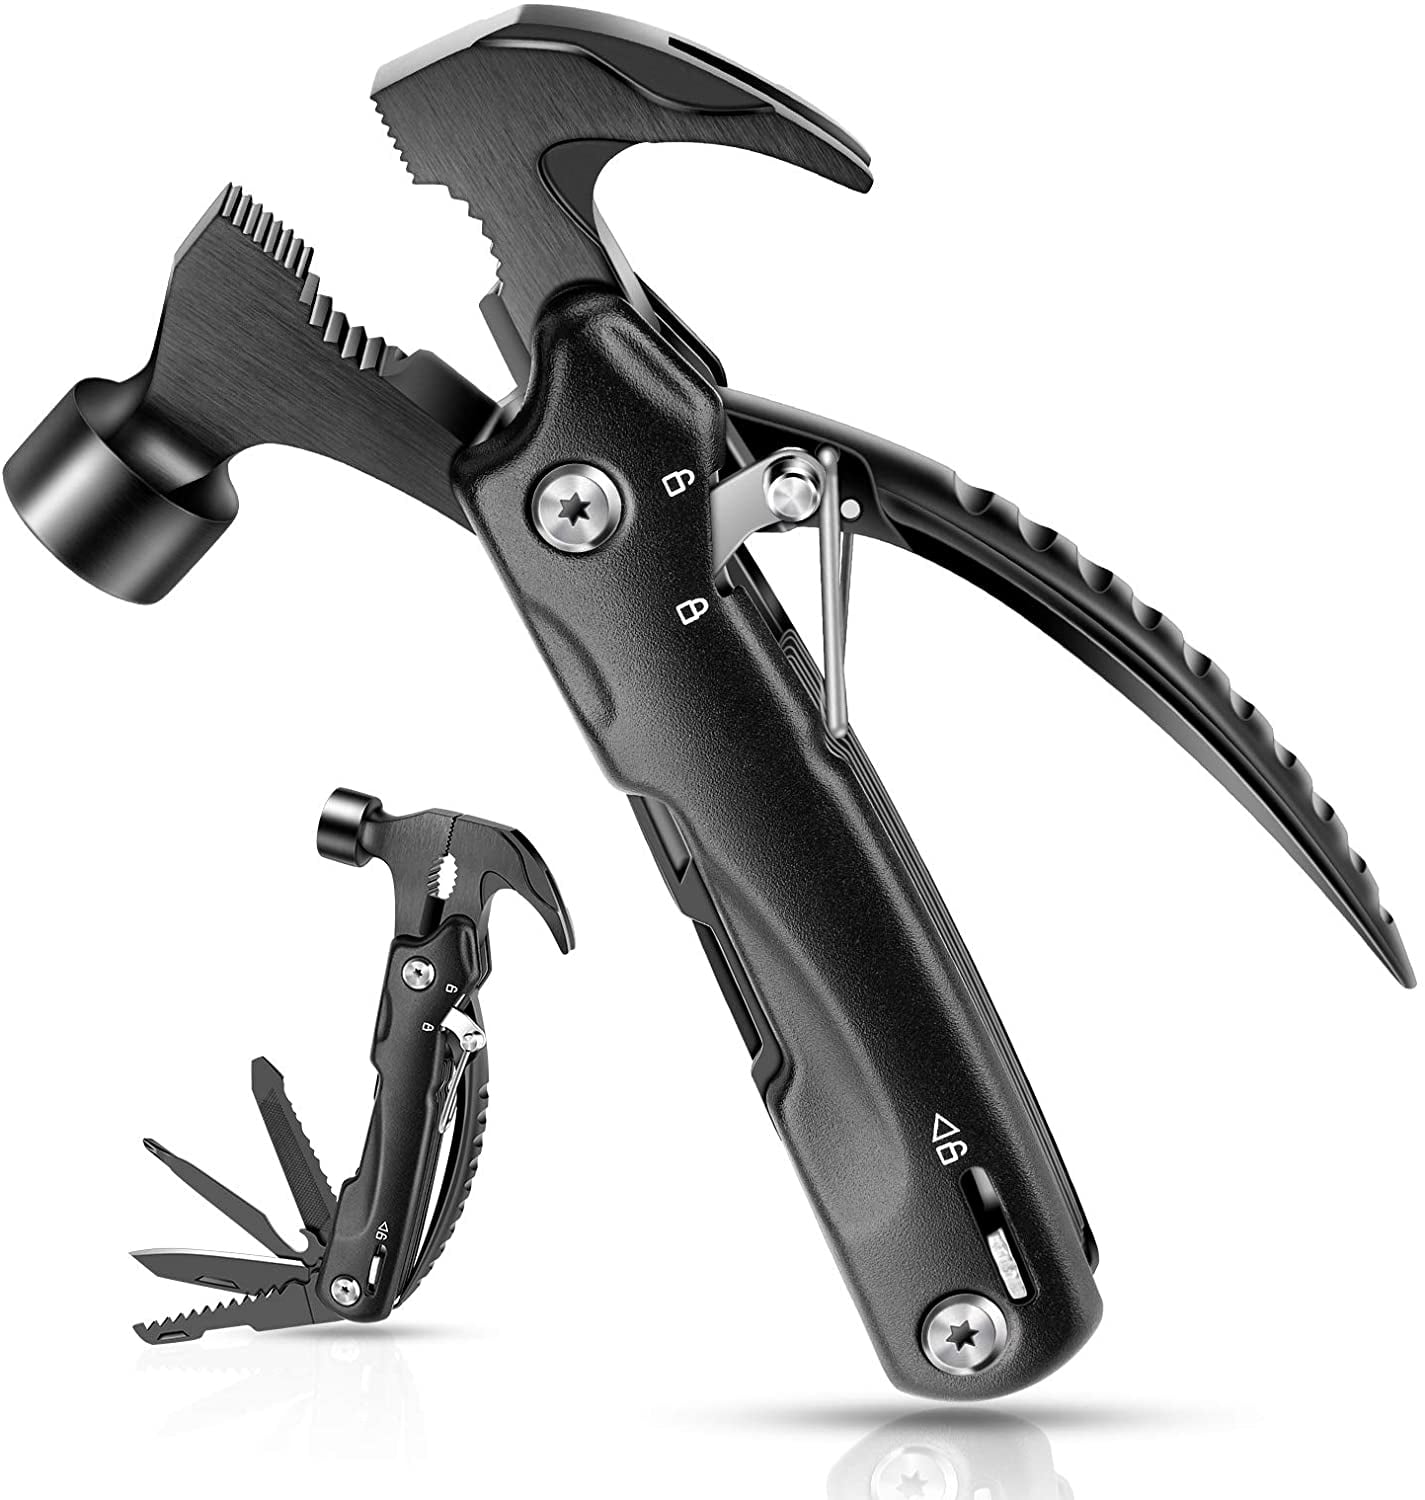 Cool Gadgets for Men,Unique Gifts for Him/Dad on Birthday/Valentines Day/Fathers Day/Anniversary Christmas Stocking Stuffers Gifts for Men,14 in 1 Multitool Camping Accessories 